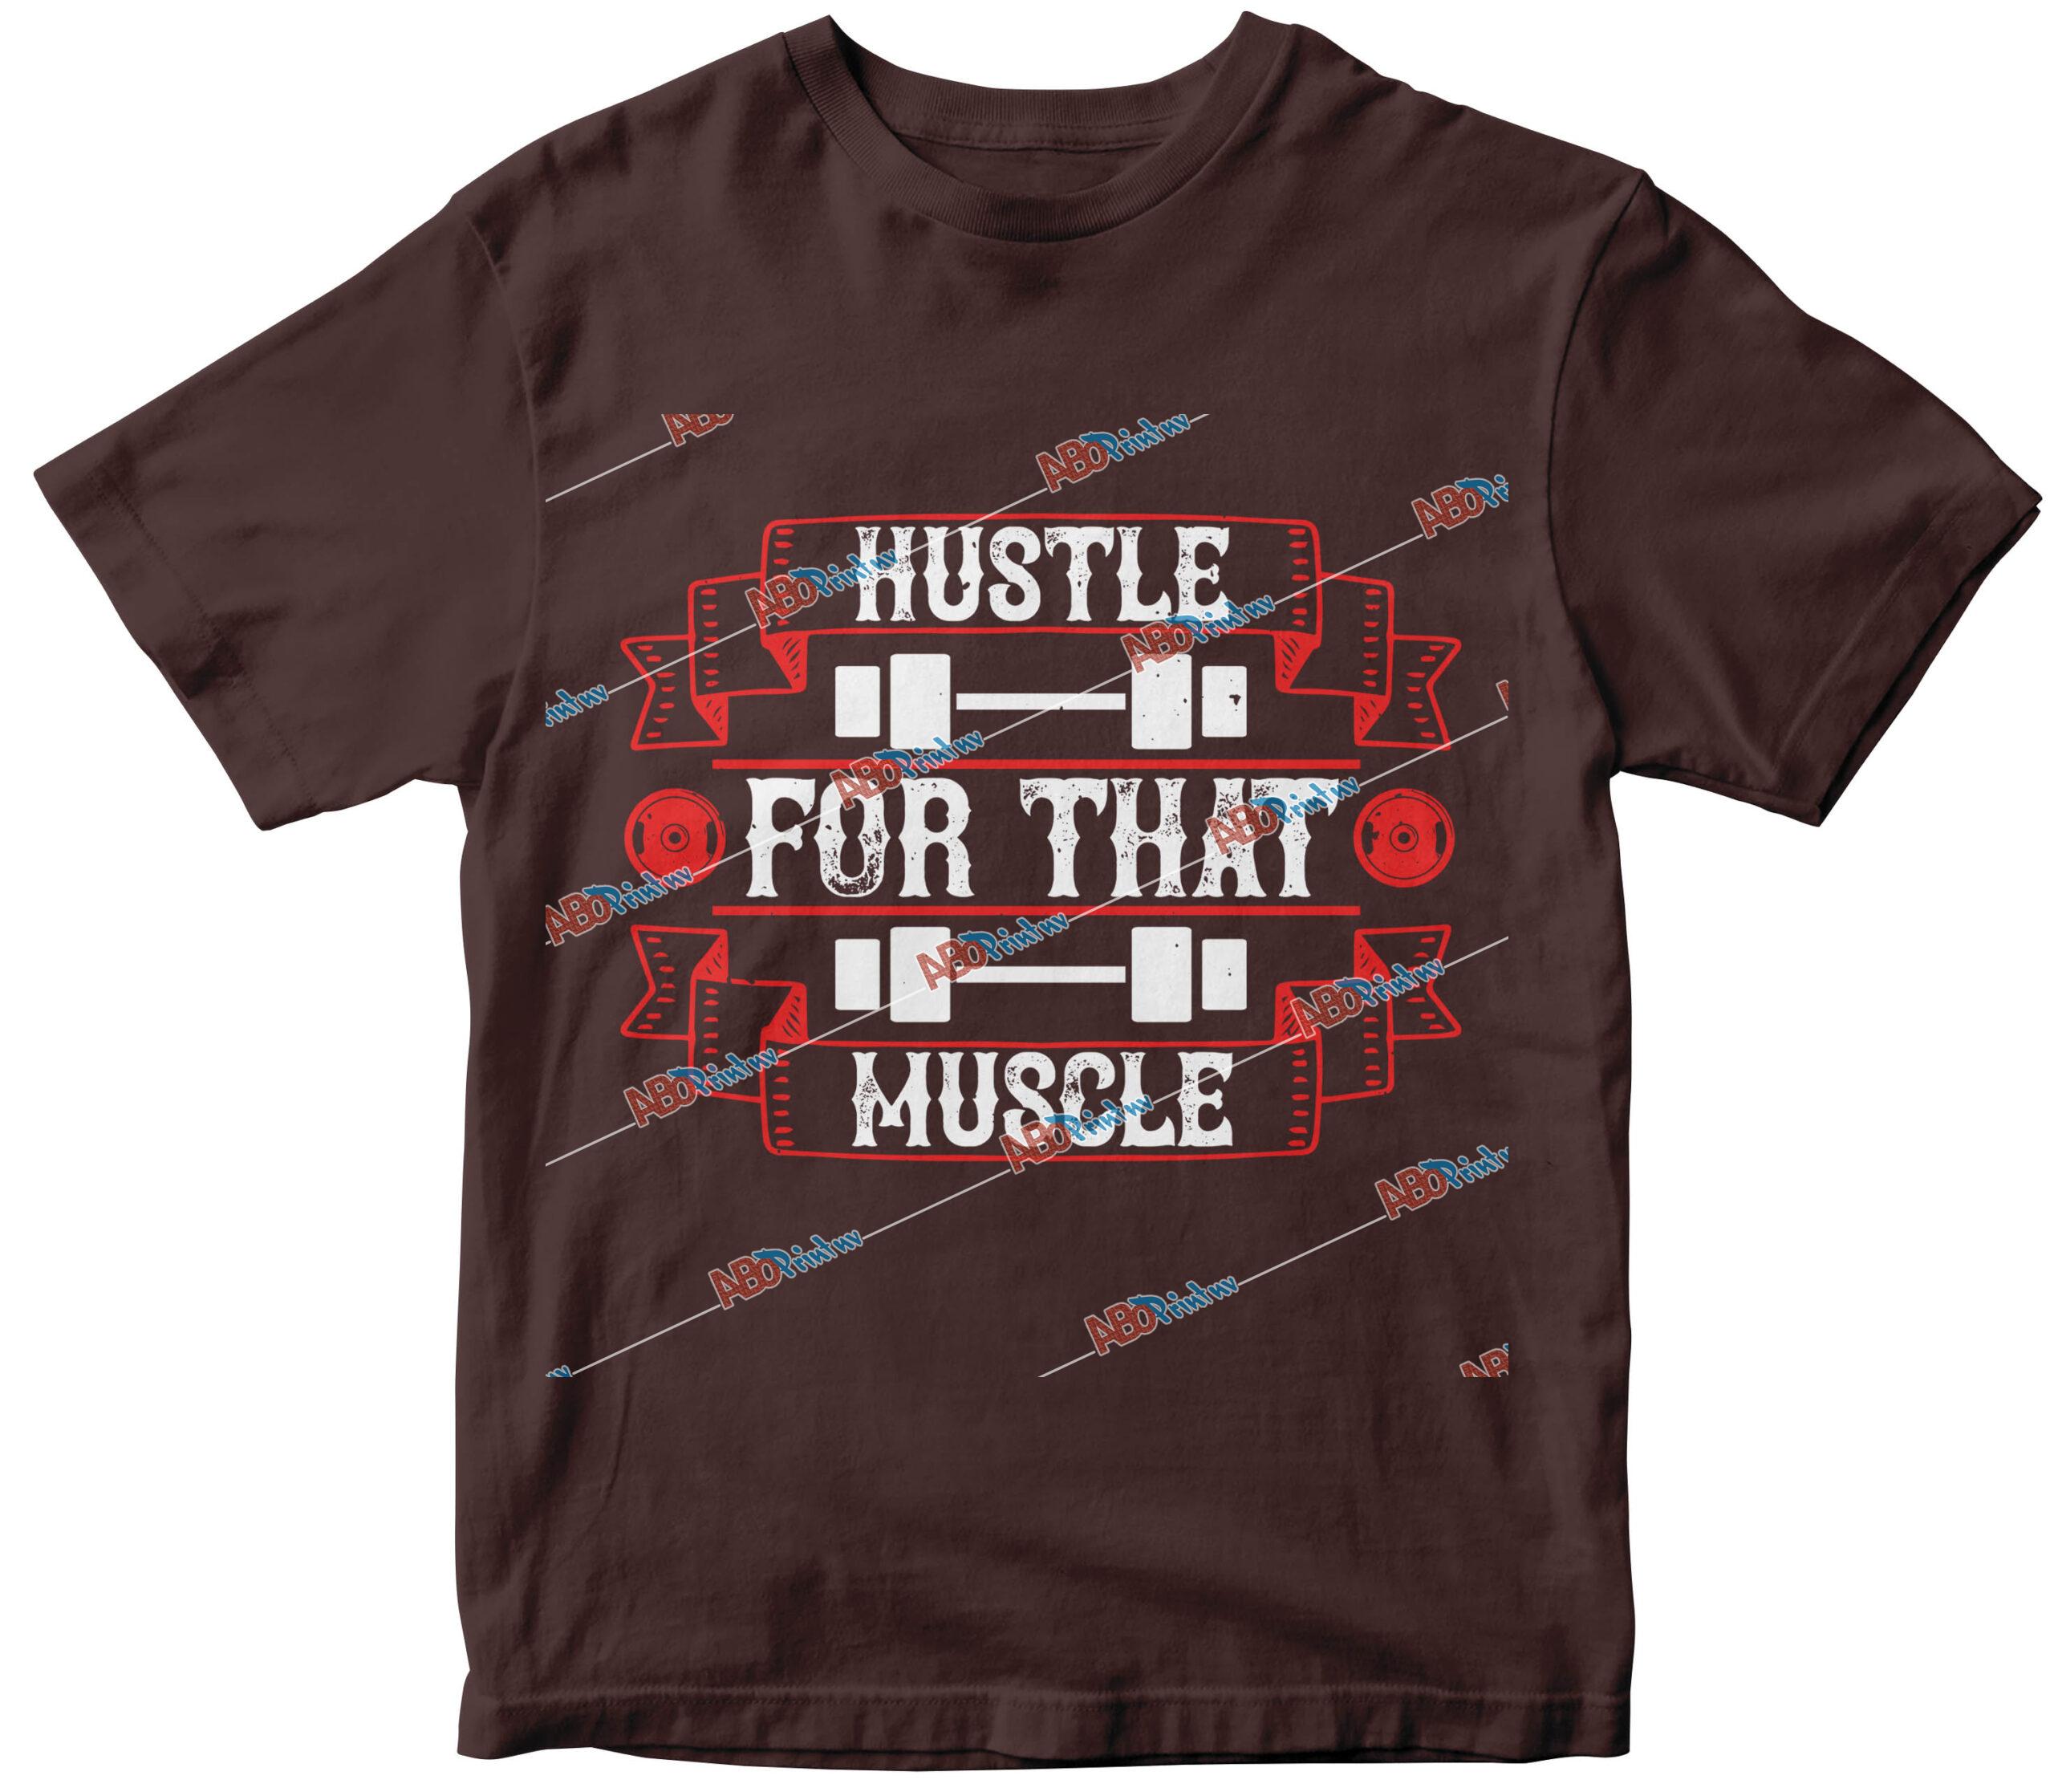 Hustle for that muscle.jpg